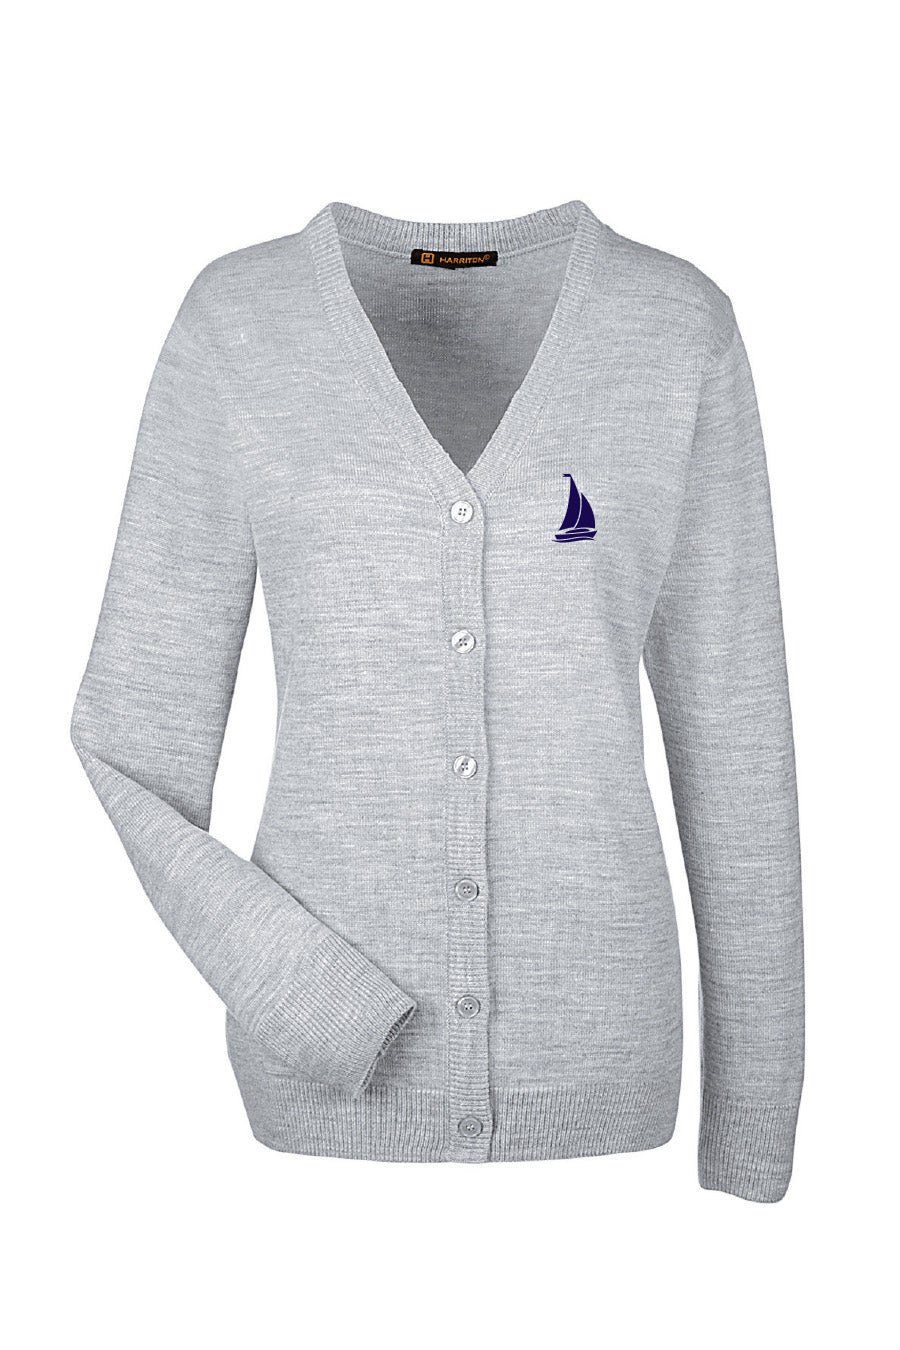 Load image into Gallery viewer, Sailboat Cardigan
